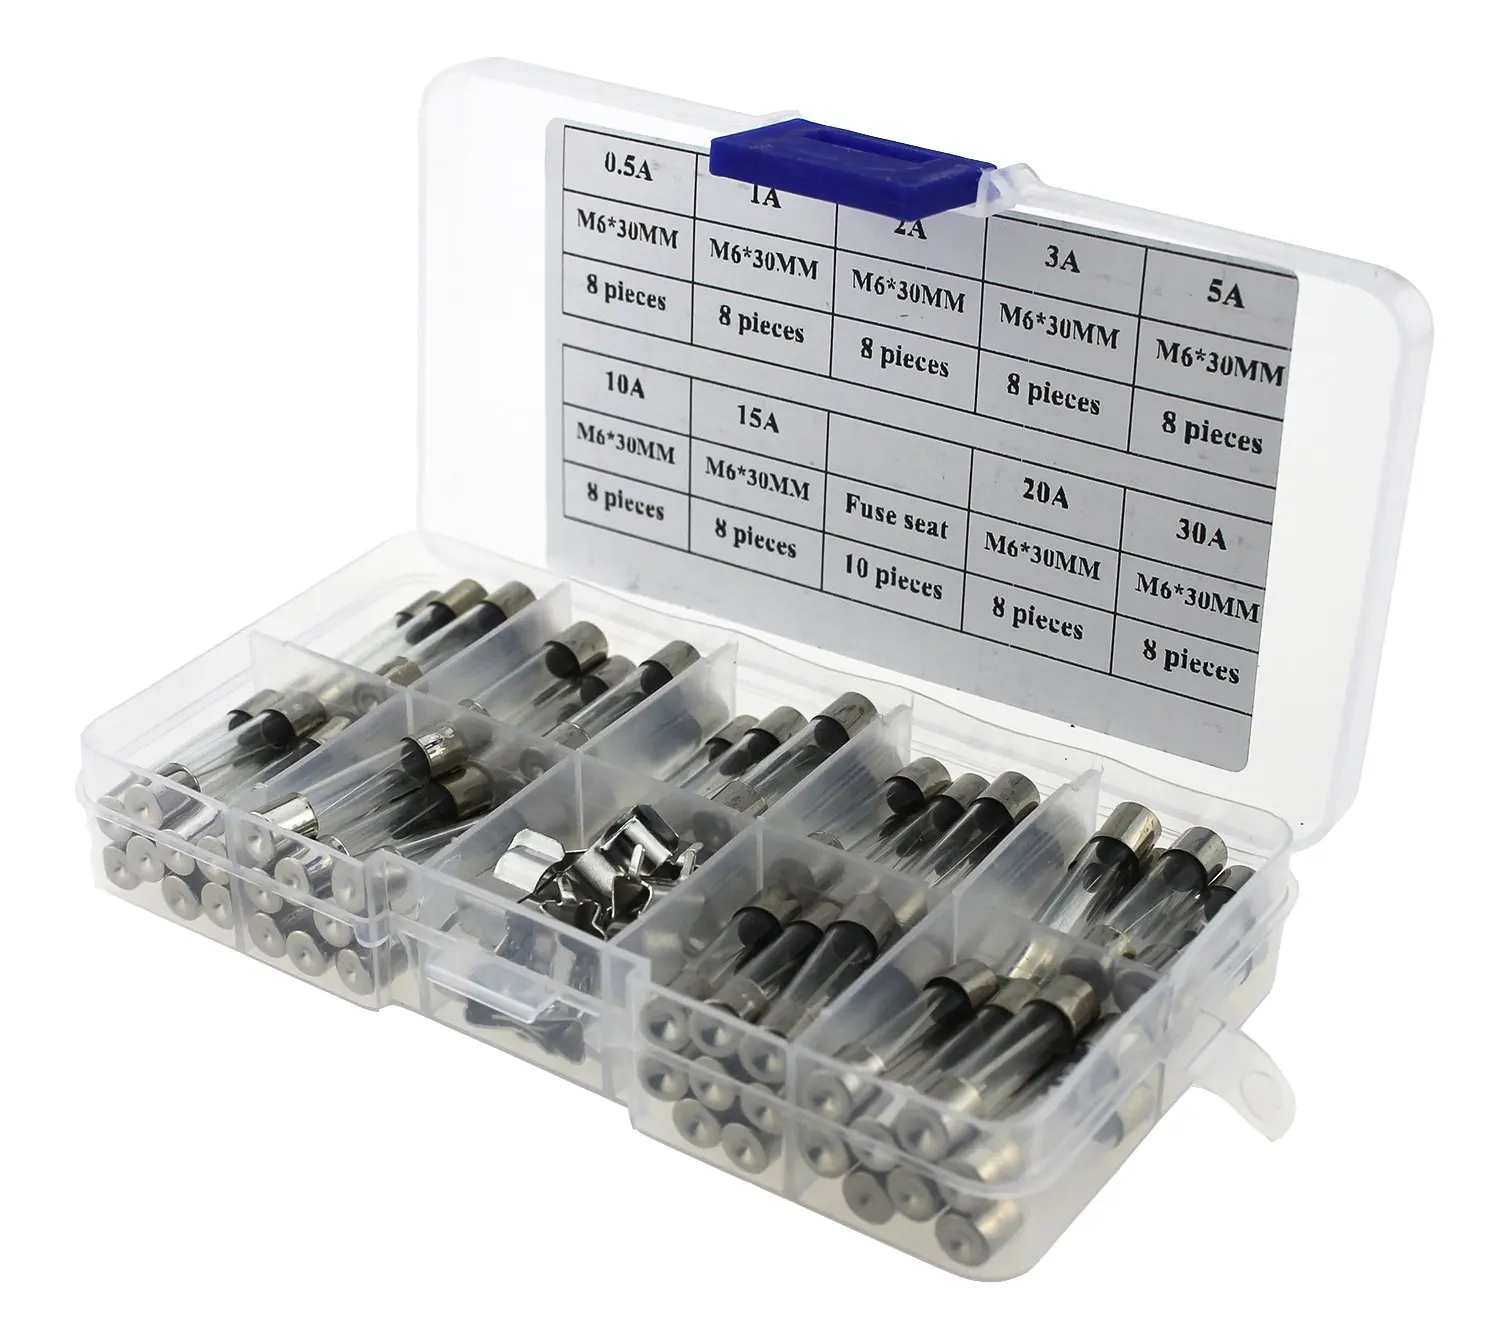 Details about   6x30mm Quick Blow Glass Tube Fuse Assorted Kit 72pcs Fuse Seat 20pcs and Box